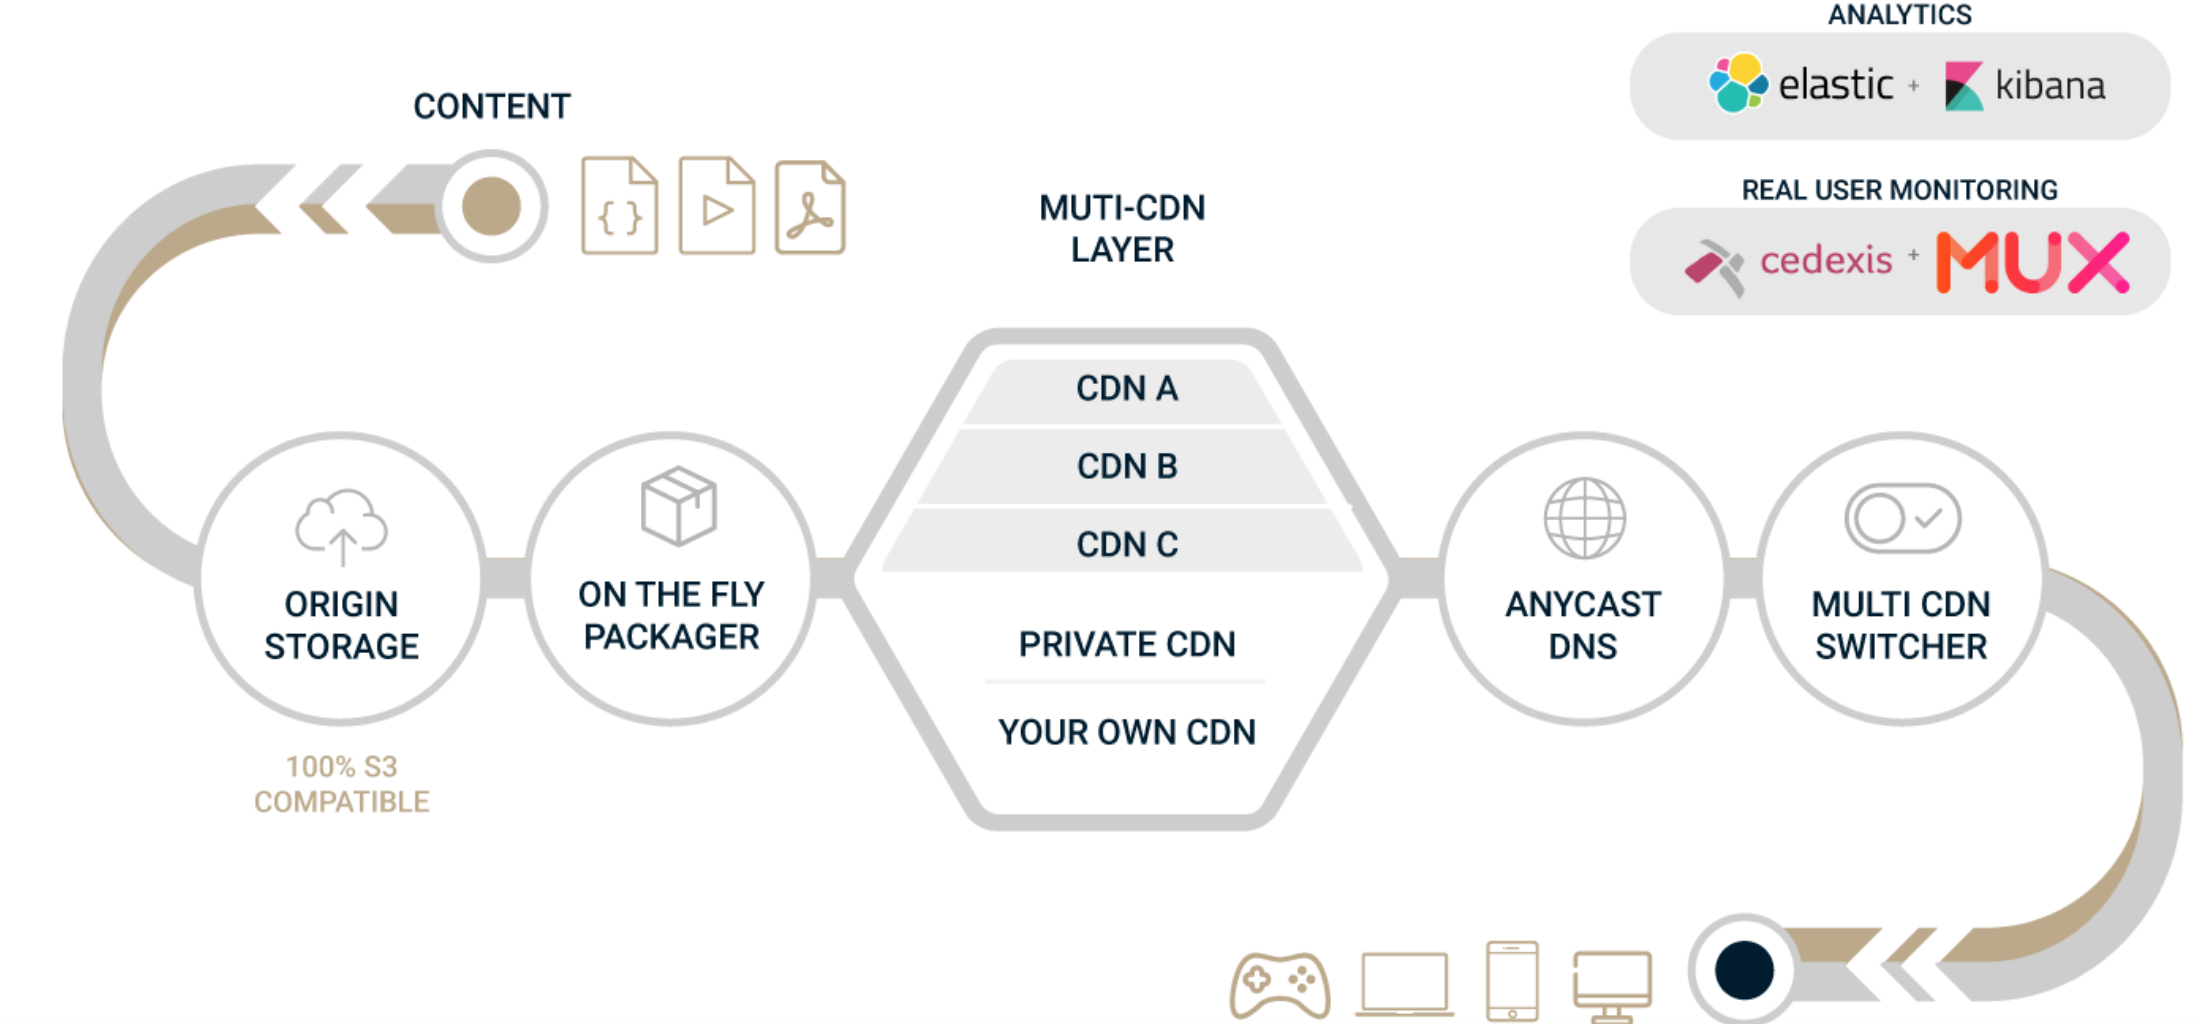 private cdn as part of video streaming workflow